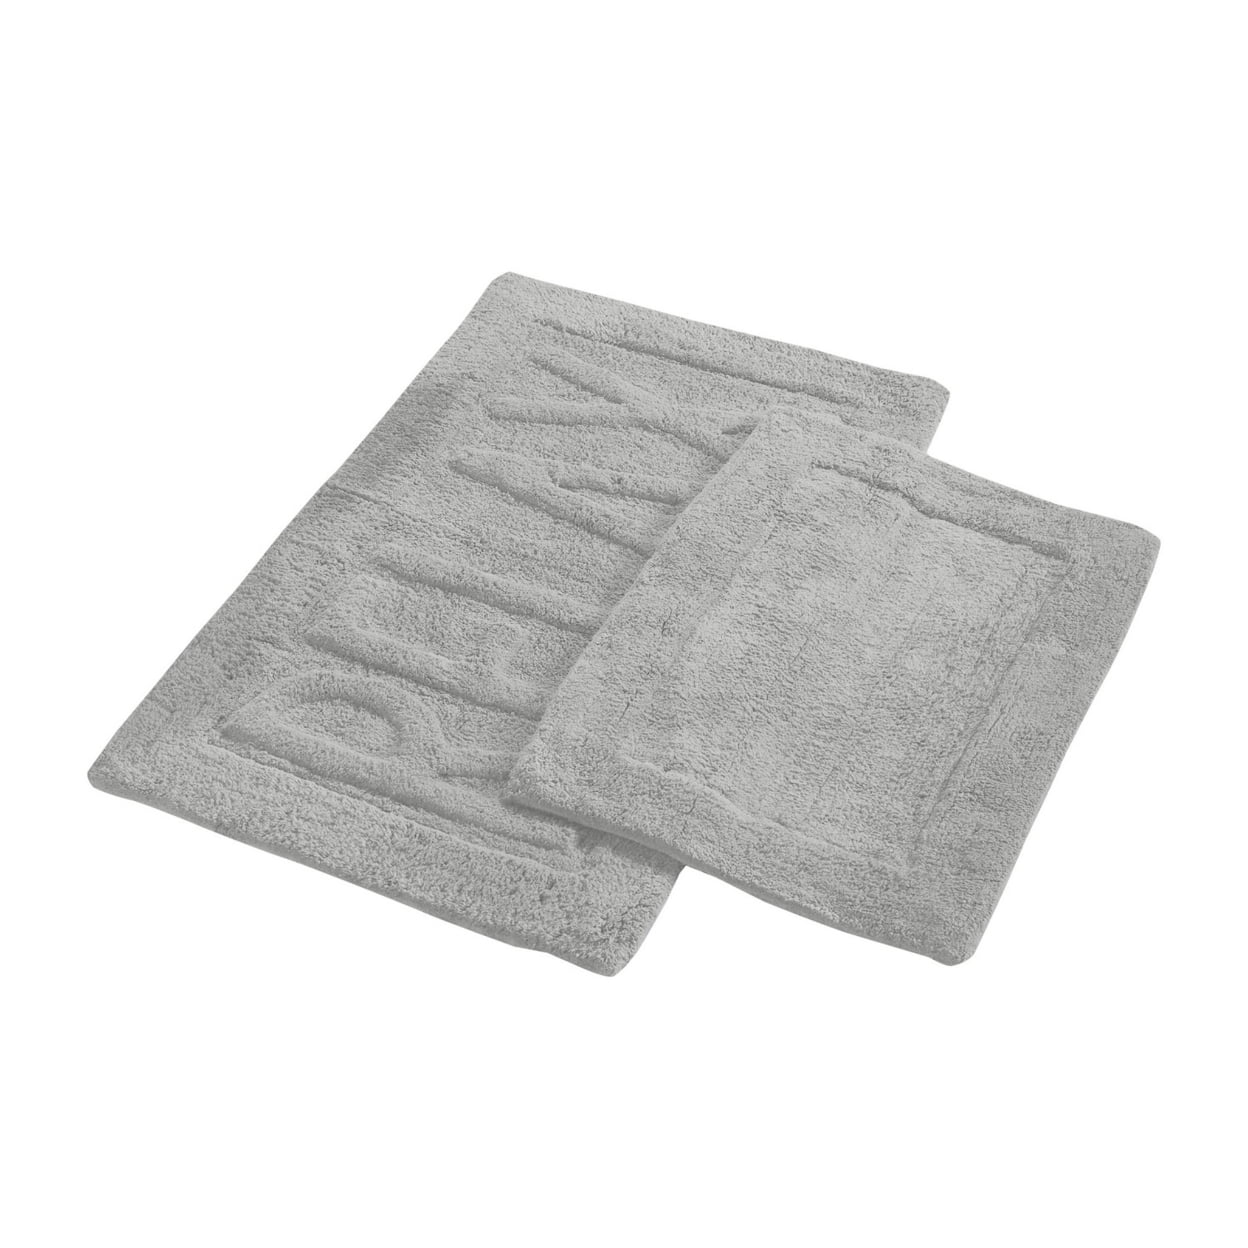 Picture of BenJara BM250896 Veria The Urban Port Bath Mat with Relax Sculpted Details, Gray - 2 Piece